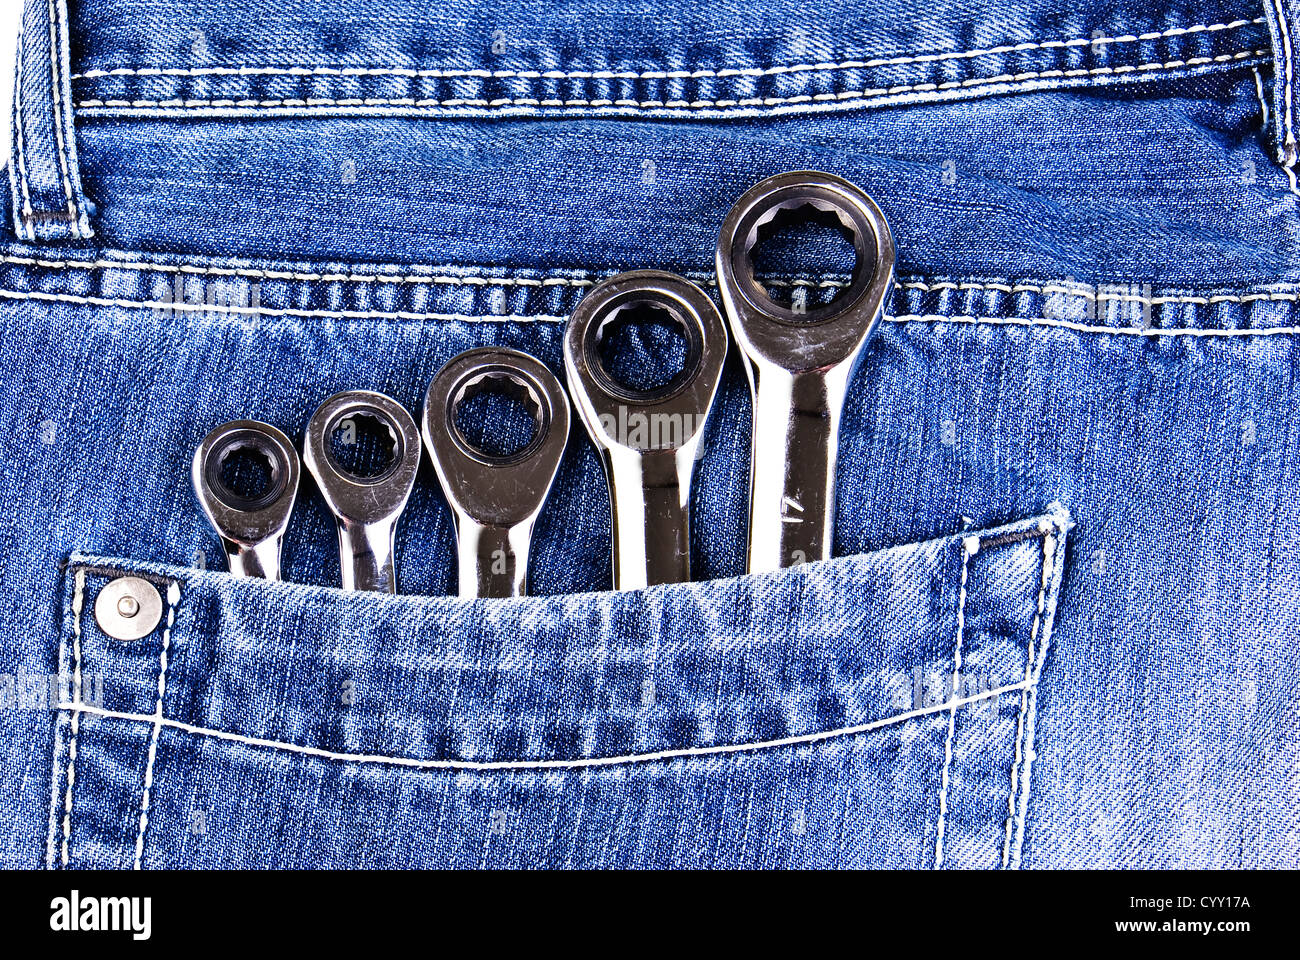 Five wrenches in a blue jeans pocket Stock Photo